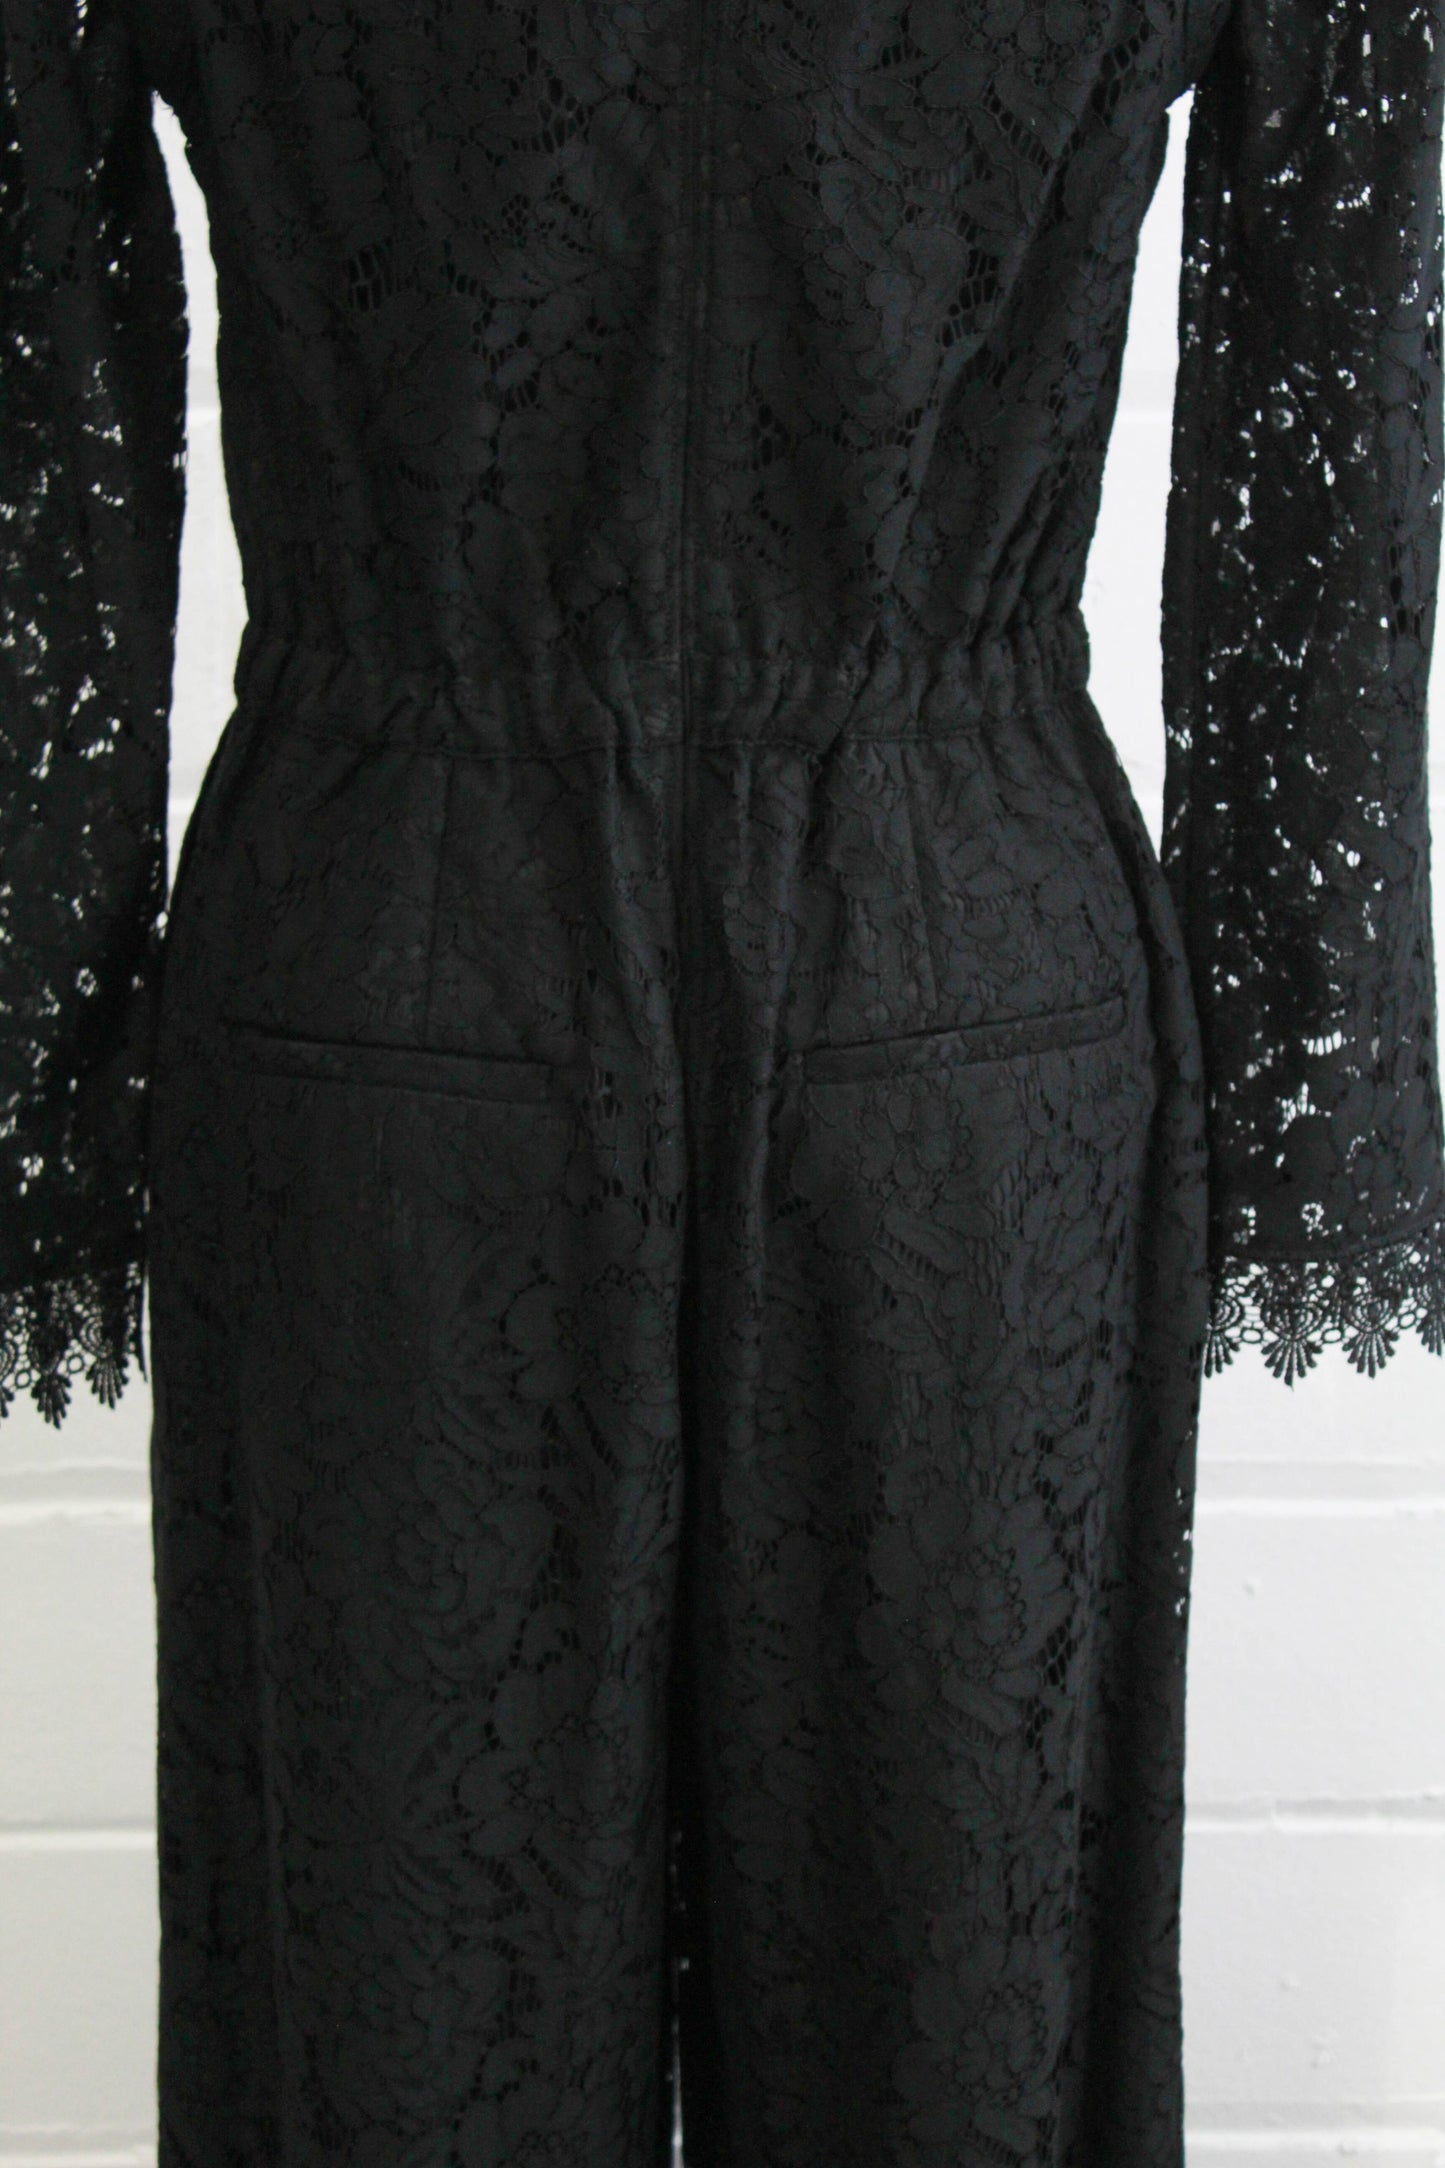 black lace jumpsuit party holiday outfit sheer lace sleeves back view close up